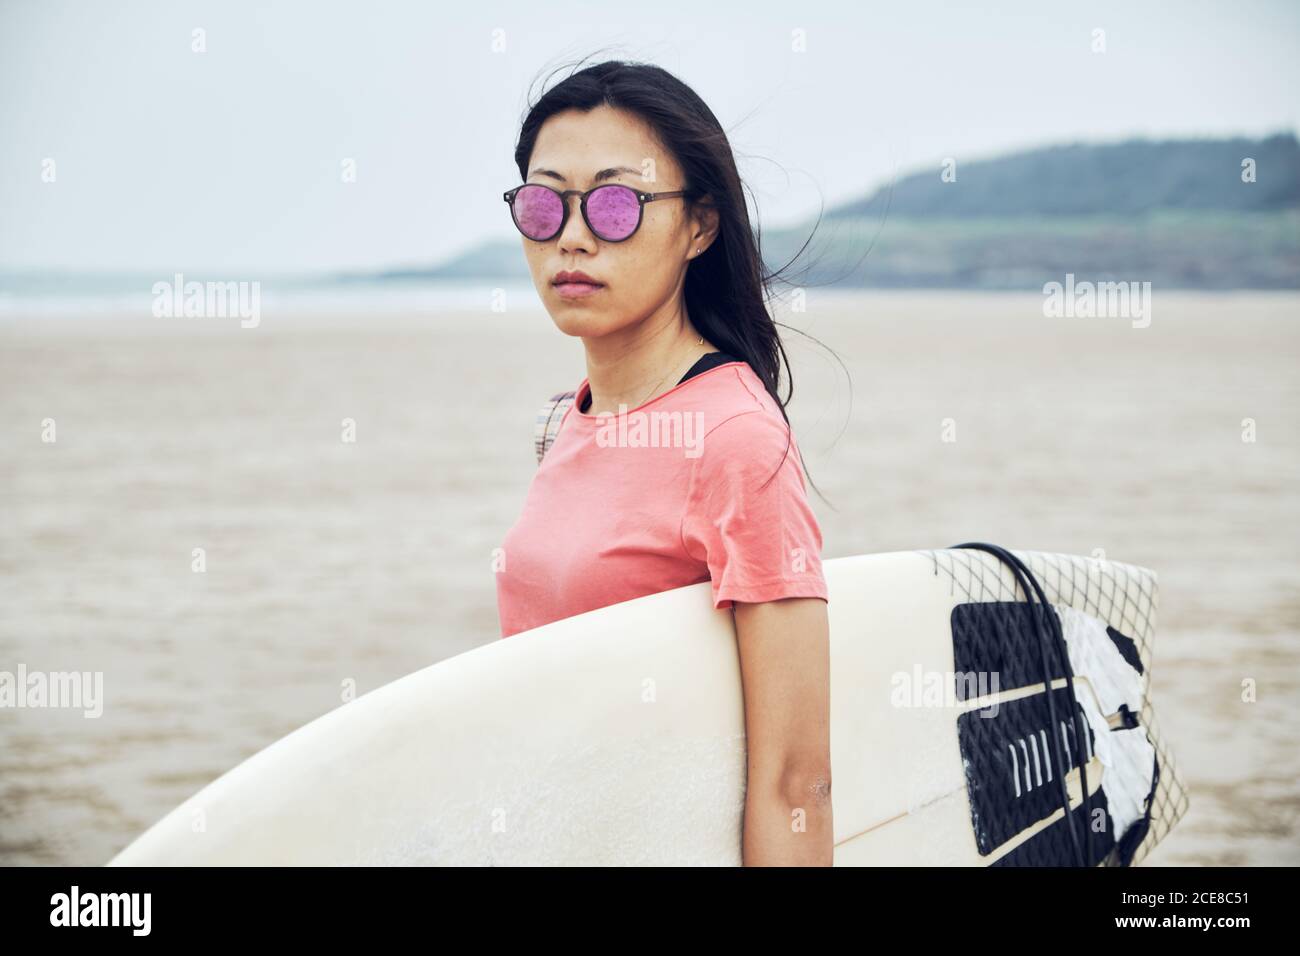 Young Asian female surfer in summer outfit walking on sandy beach and carrying surfboard against calm blue sea Stock Photo